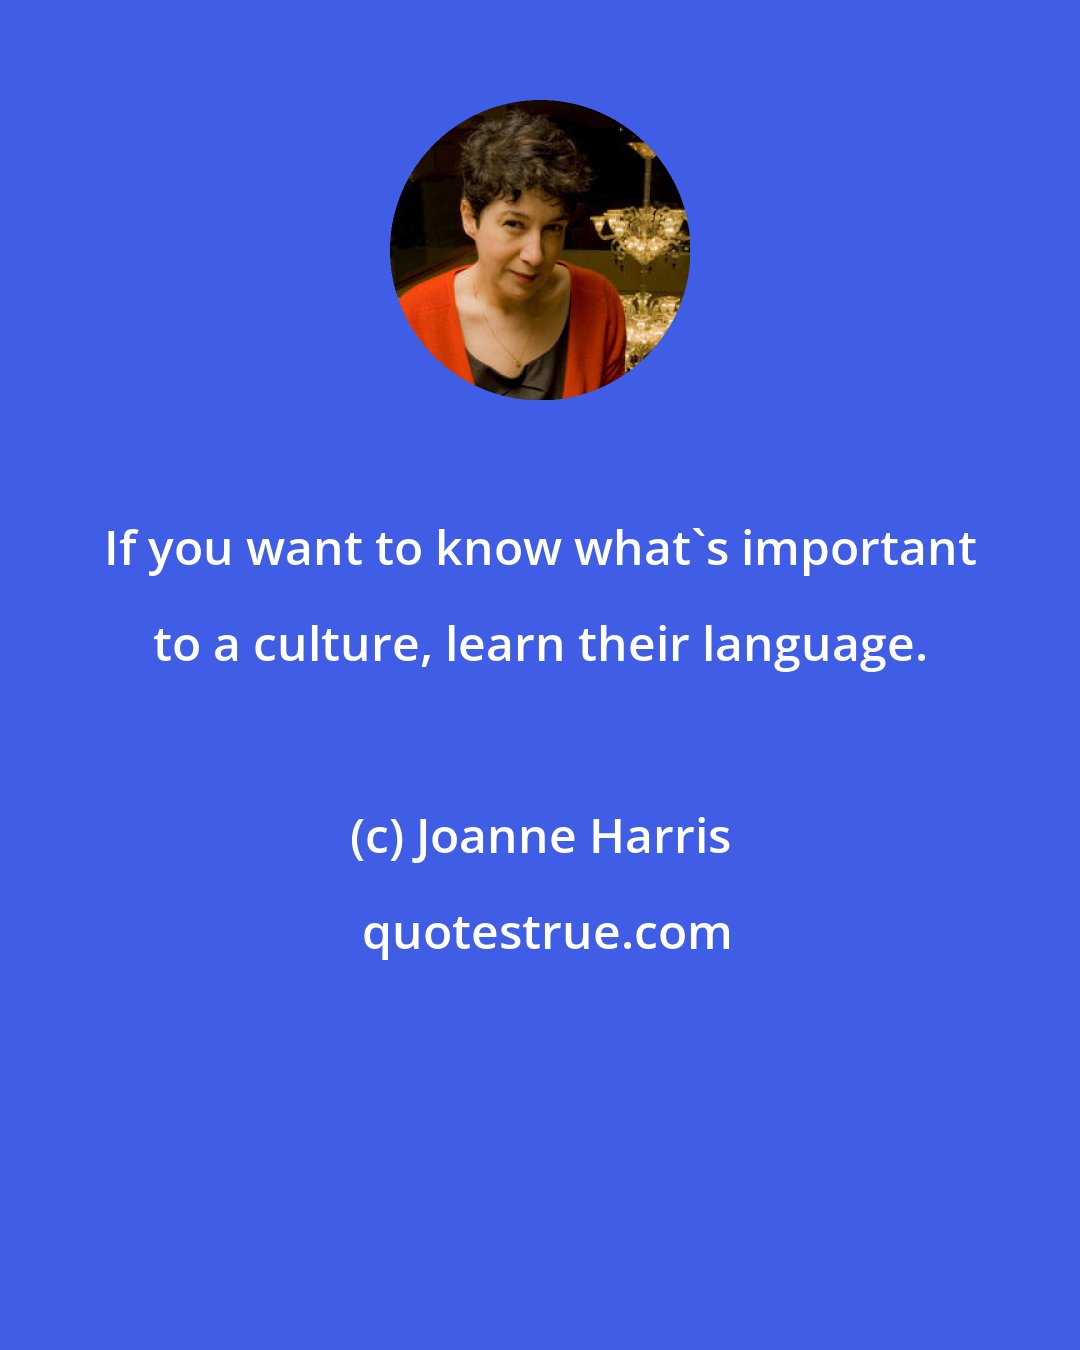 Joanne Harris: If you want to know what's important to a culture, learn their language.